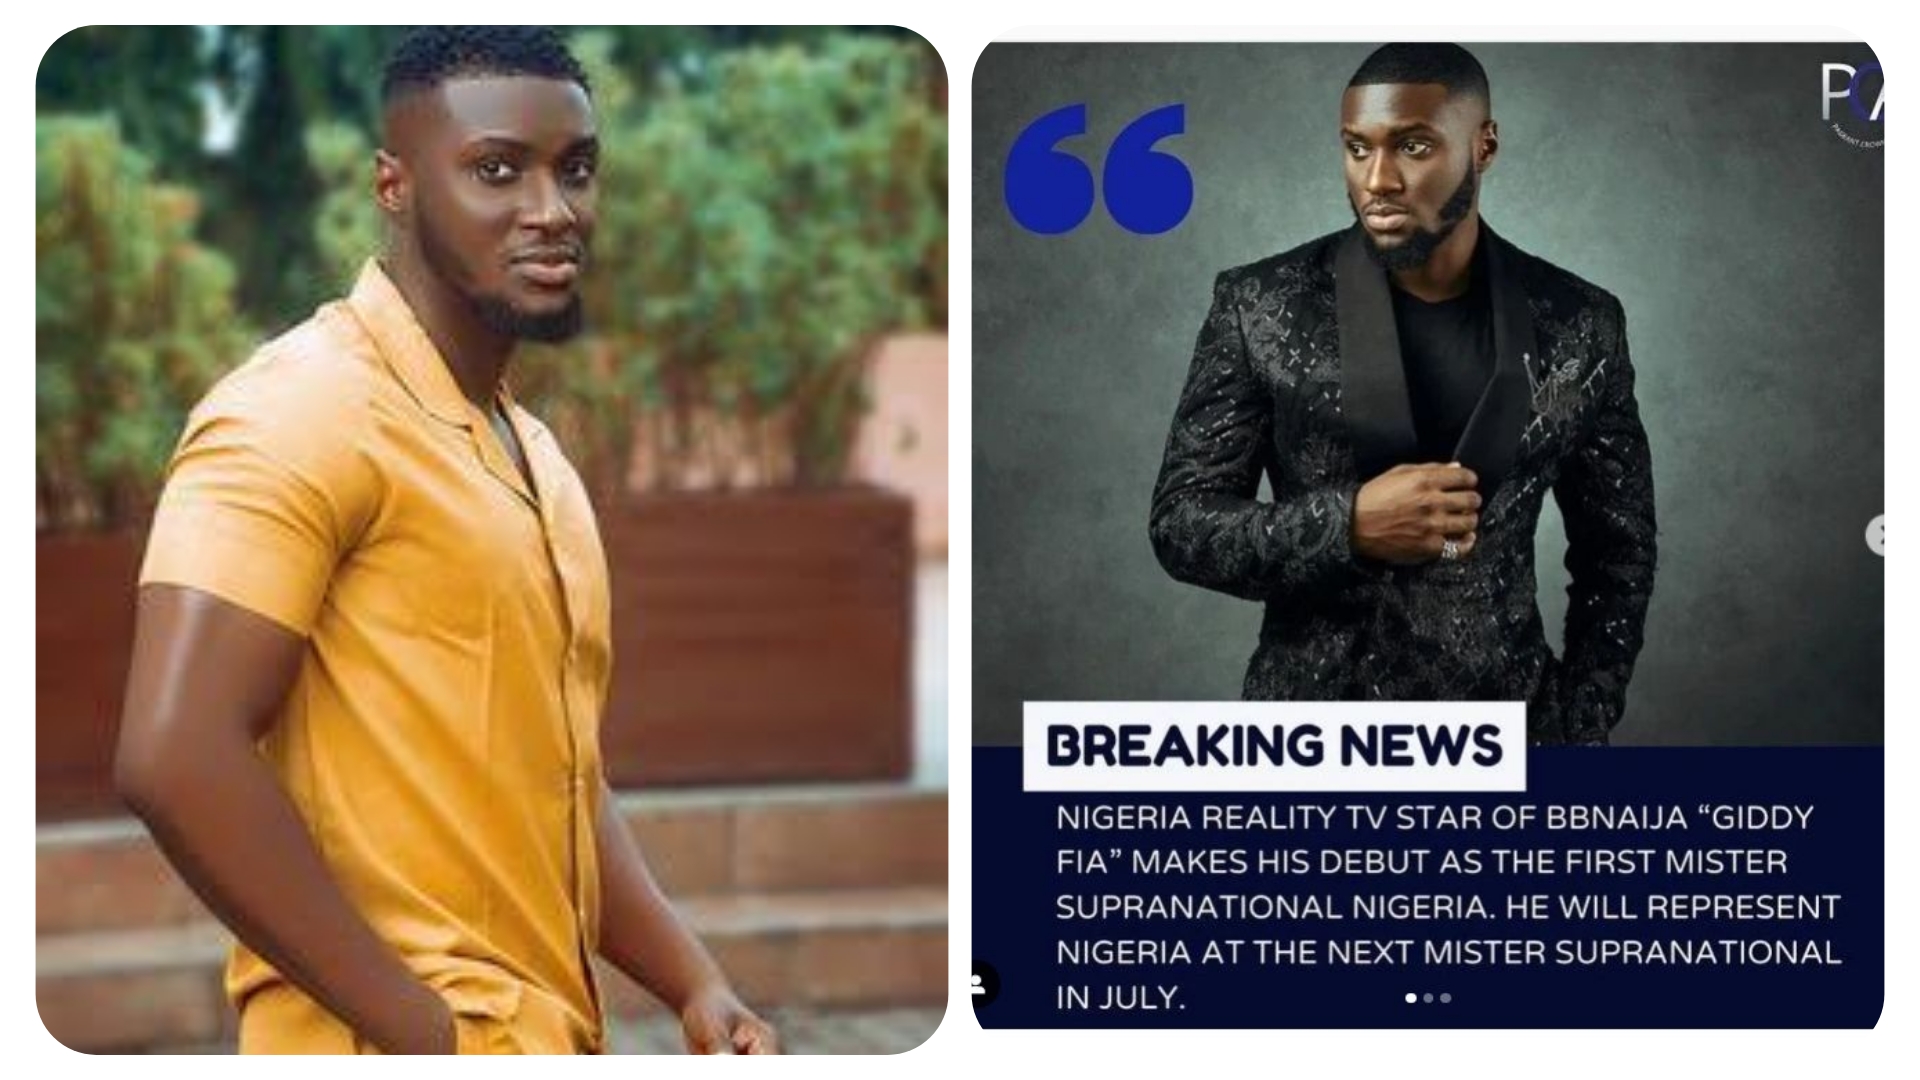 JUST IN: Bbnaija's Giddy Fia Becomes The First Mister Supranational In Nigeria [DETAILS]